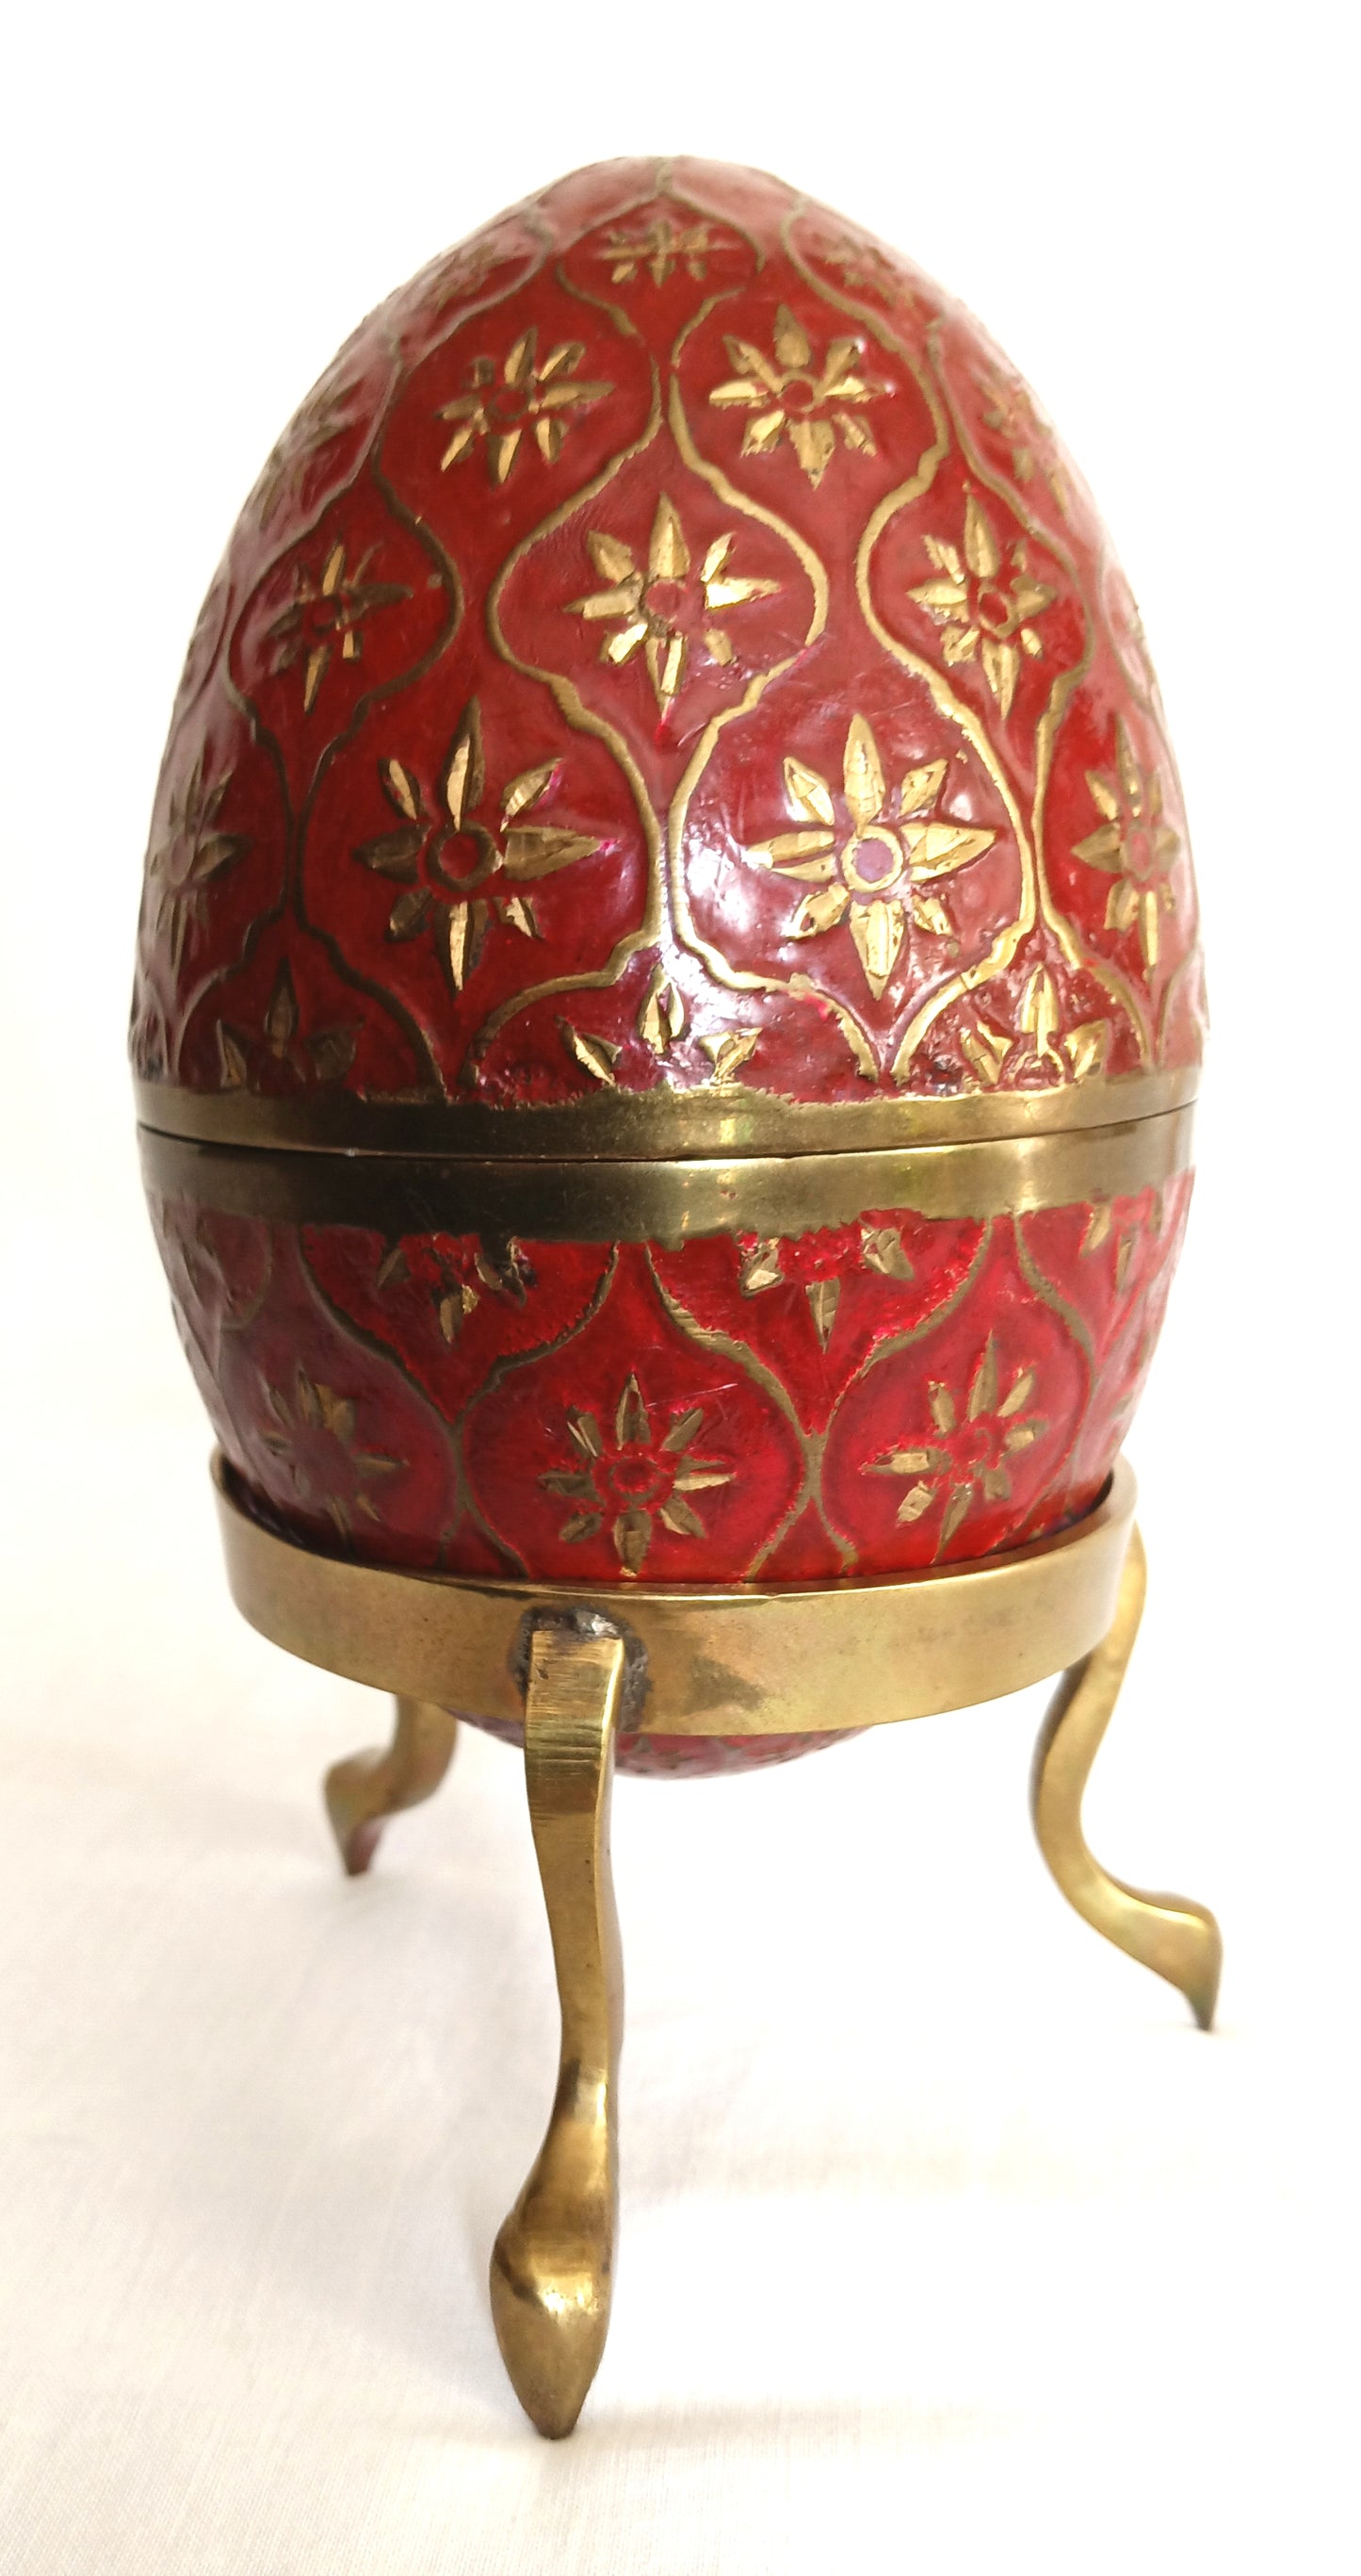 Vintage Cloisonné Large Egg Shaped Red Enamel Brass Floral Design Egg Opens in the Middle Solid Brass Stand Trinket Box-Made in India